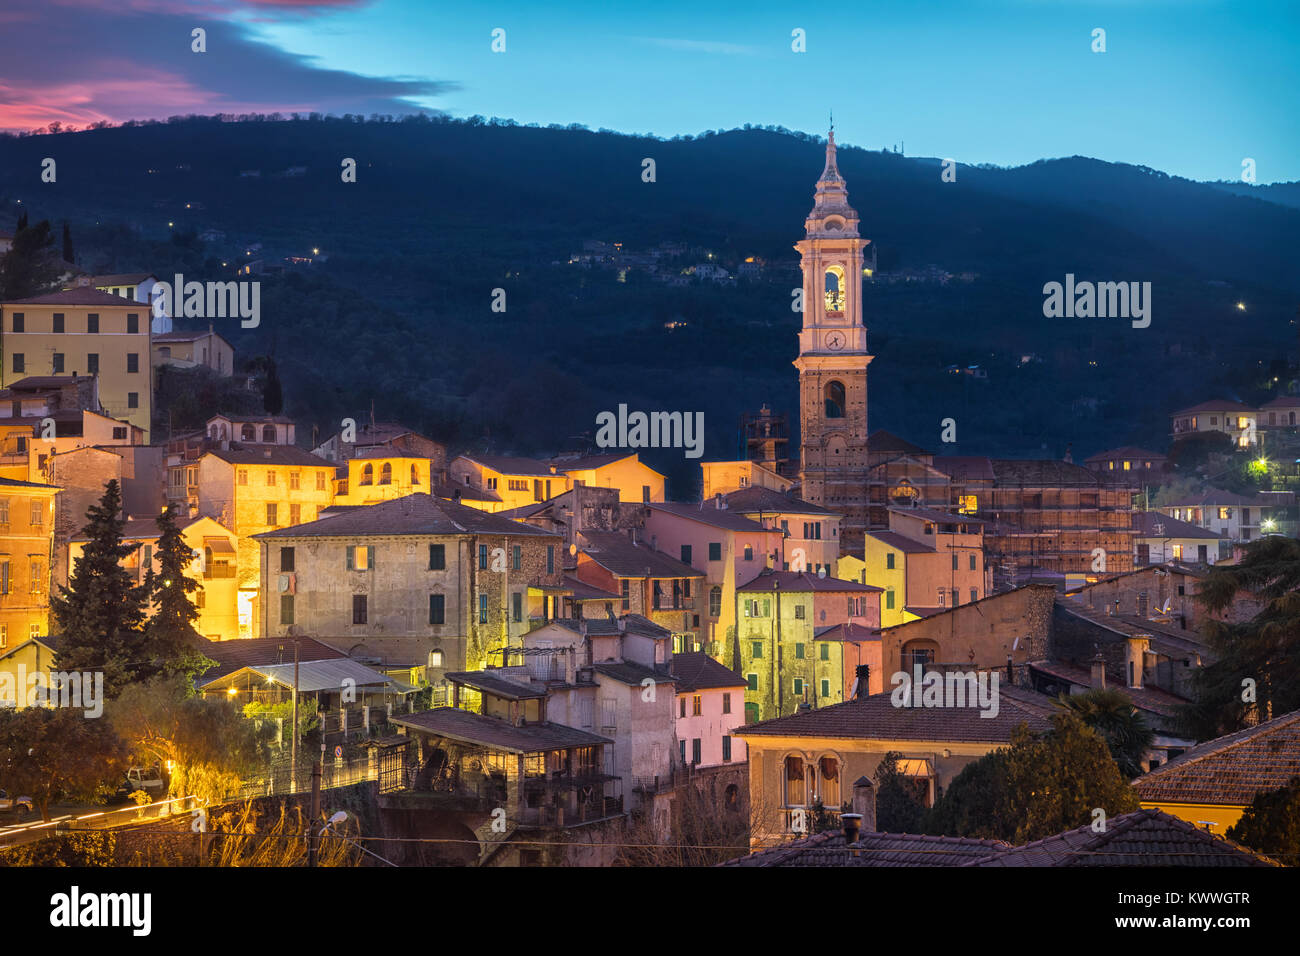 Cityscape of Dolcedo at dusk - small town located in Ligurian Alps, Italy. The main landmark is the bell tower of Church of Saint Thomas (Chiesa di Sa Stock Photo